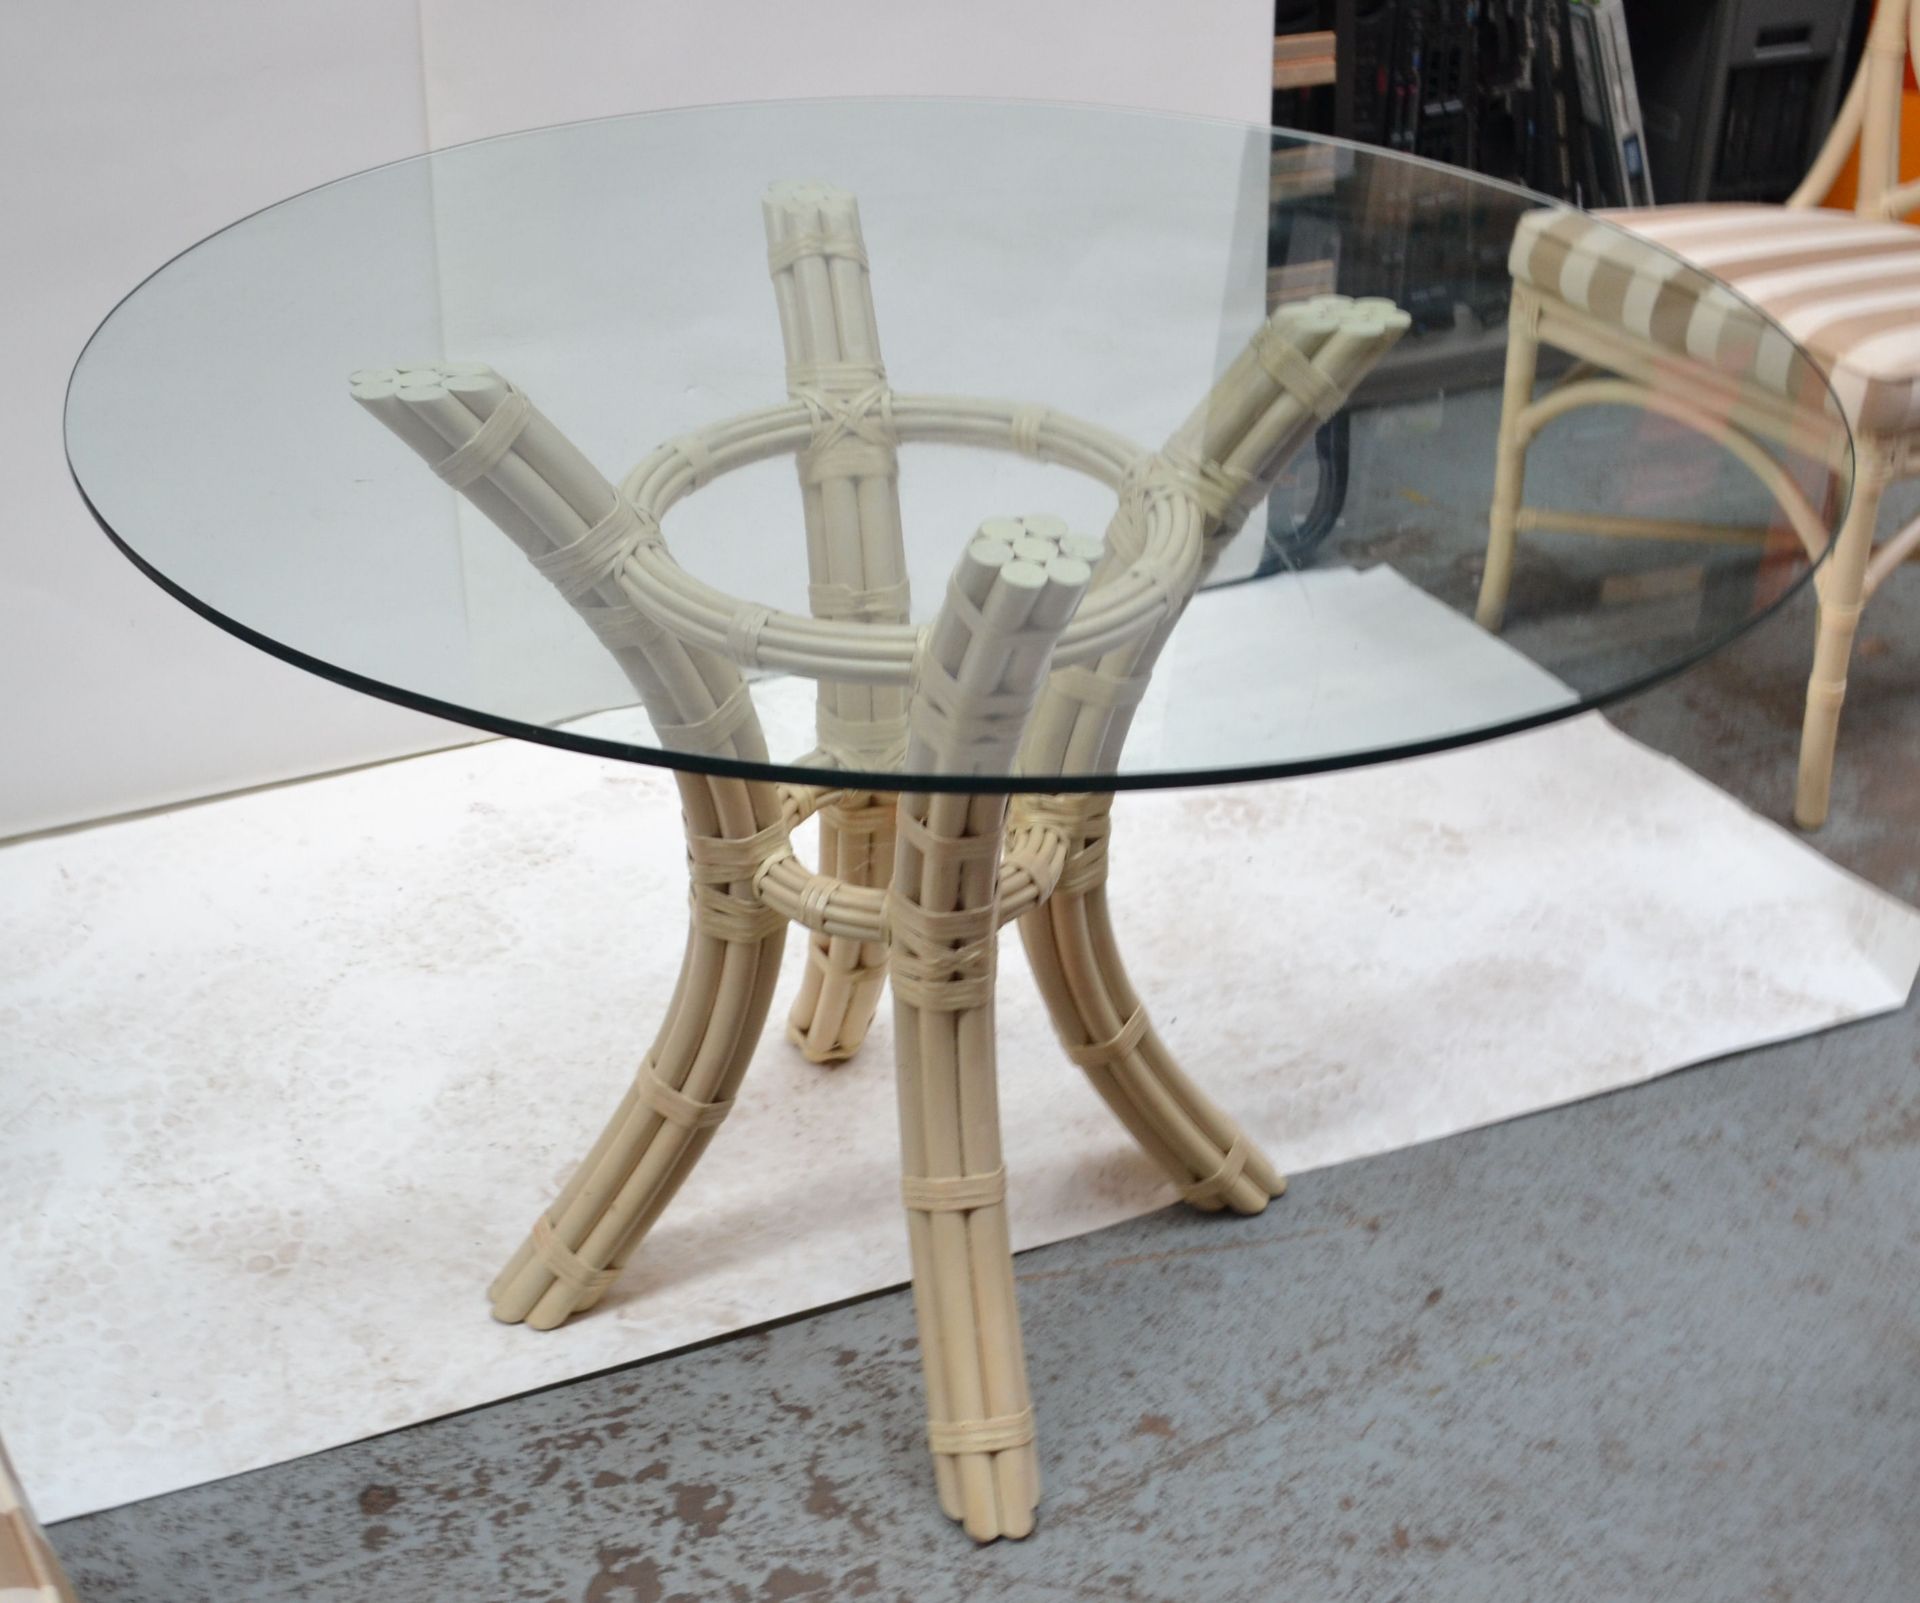 Glass Topped Cane Table with 4 Chairs - AE010 - CL007 - Location: Altrincham WA14 Dimensions: - Image 13 of 14